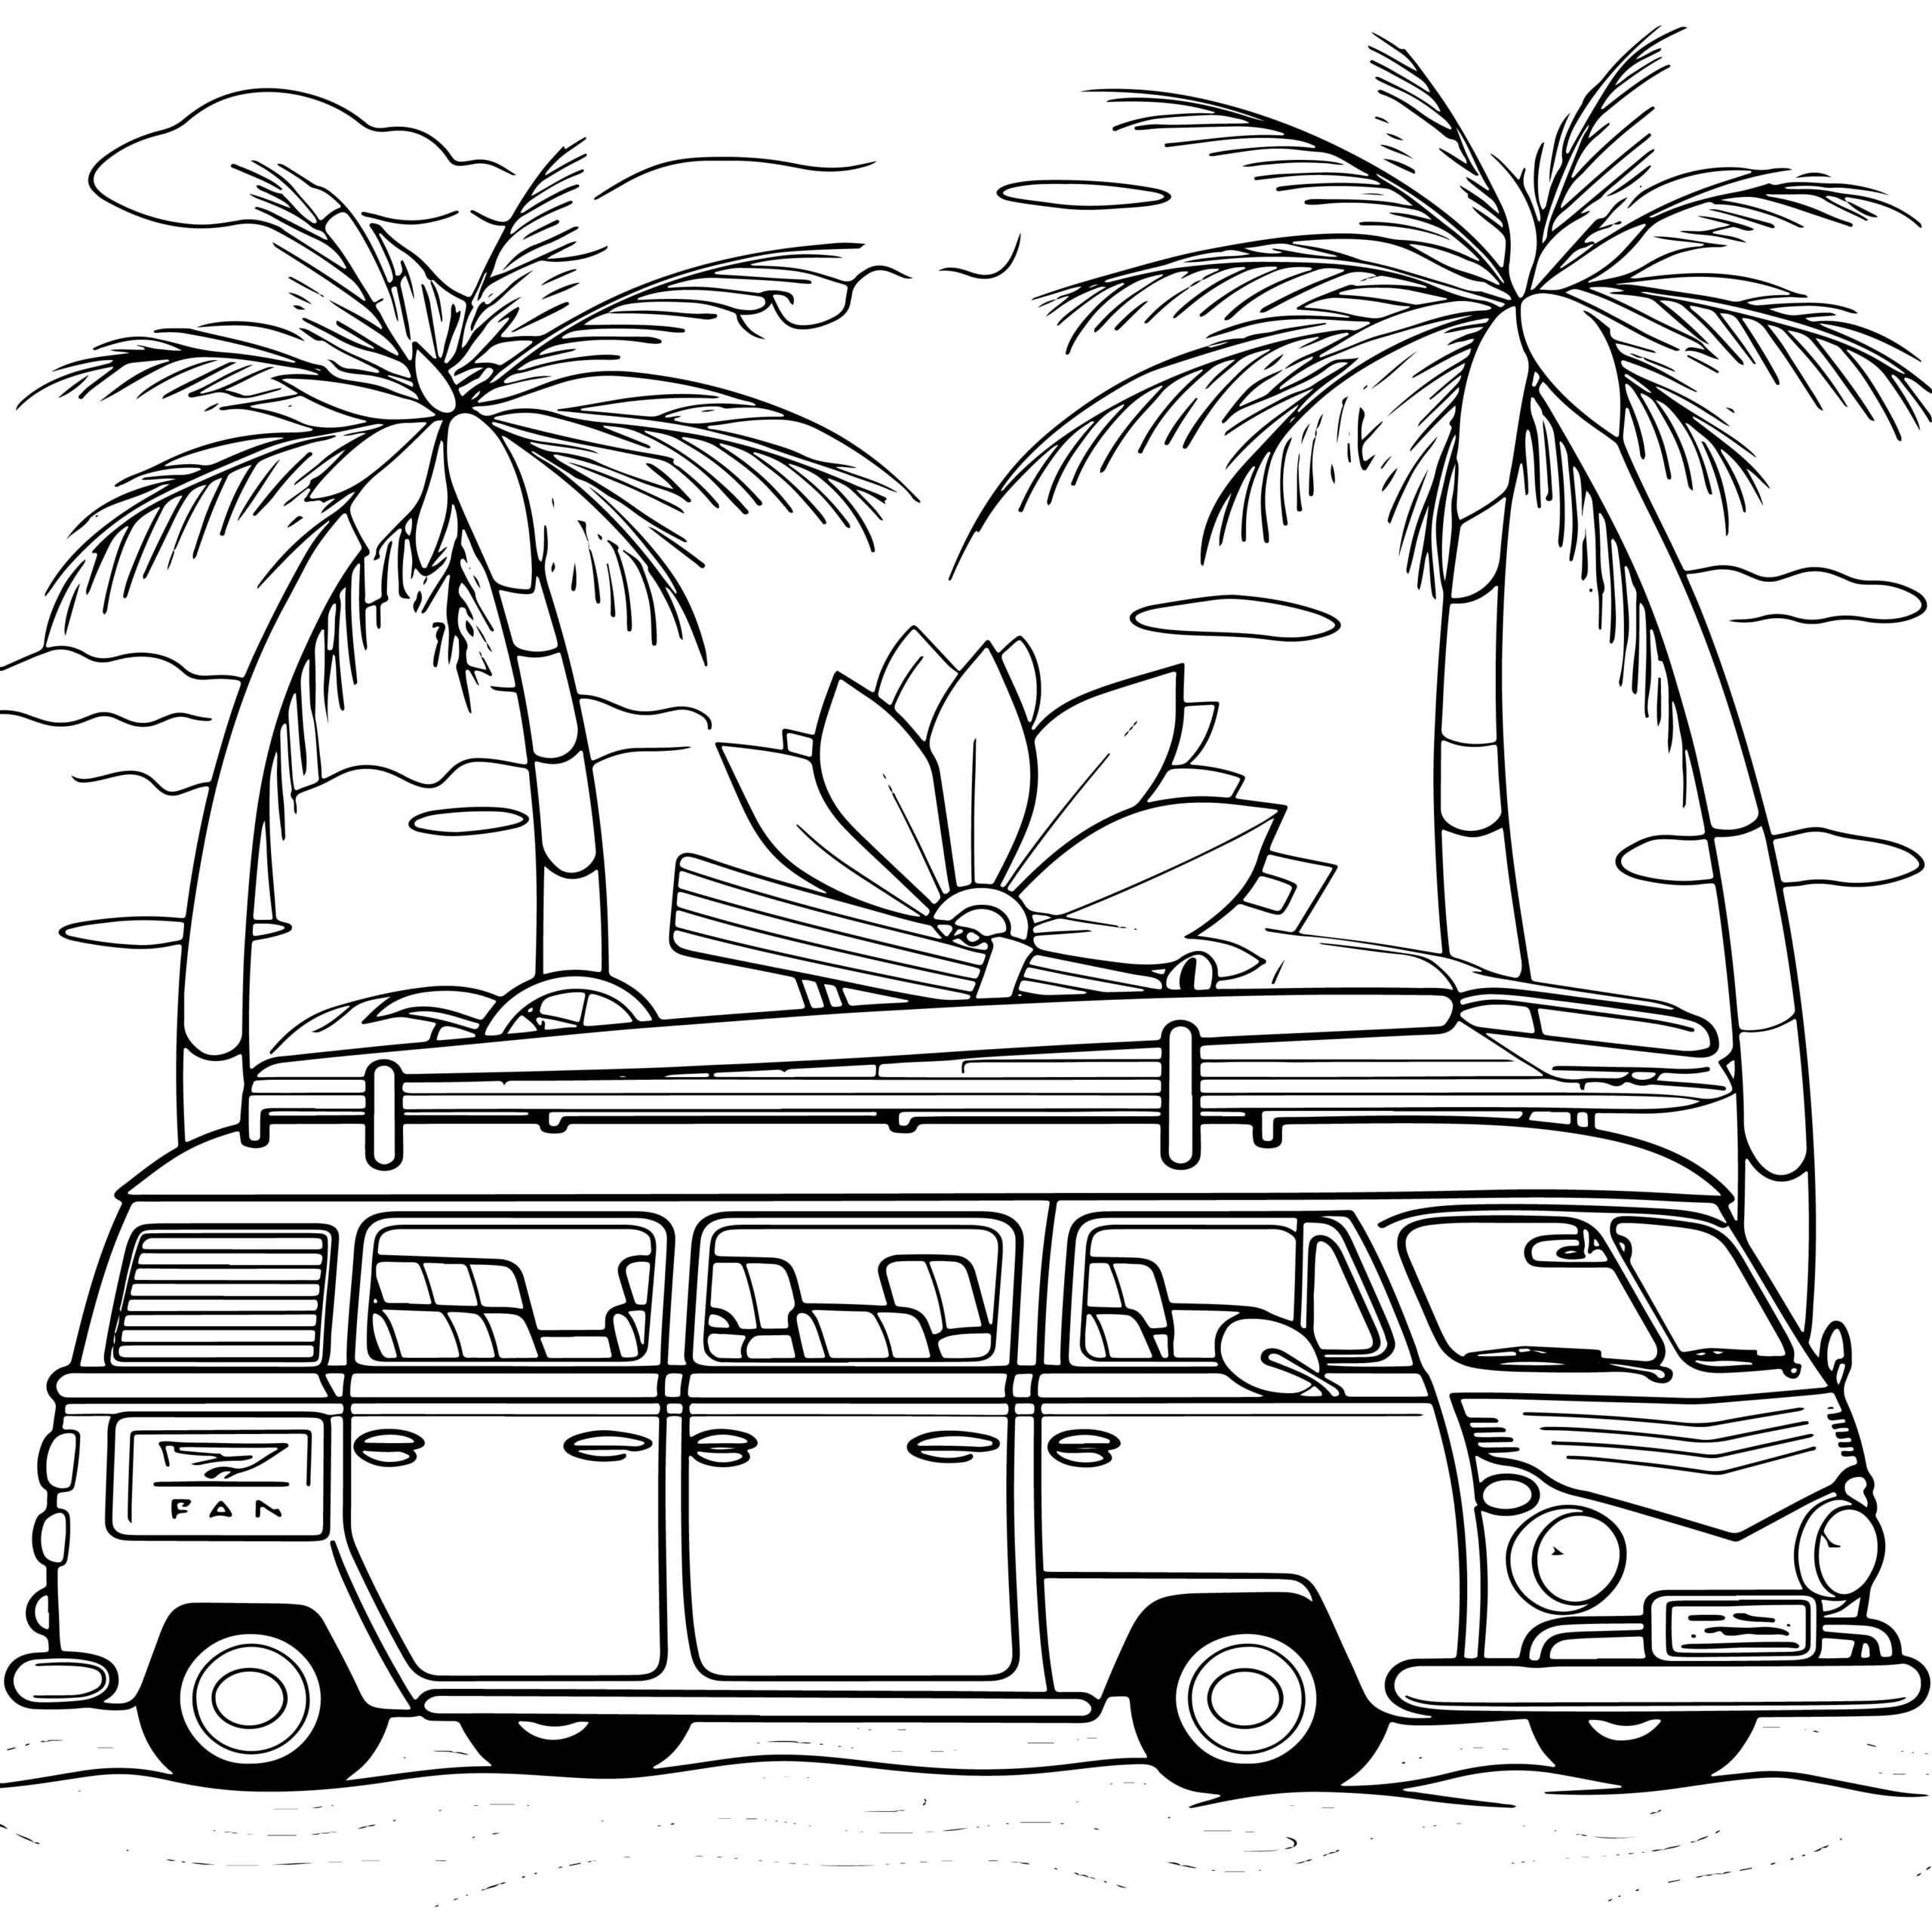 Rv road trip coloring book scenic landscapes for stress relief and relaxation made by teachers